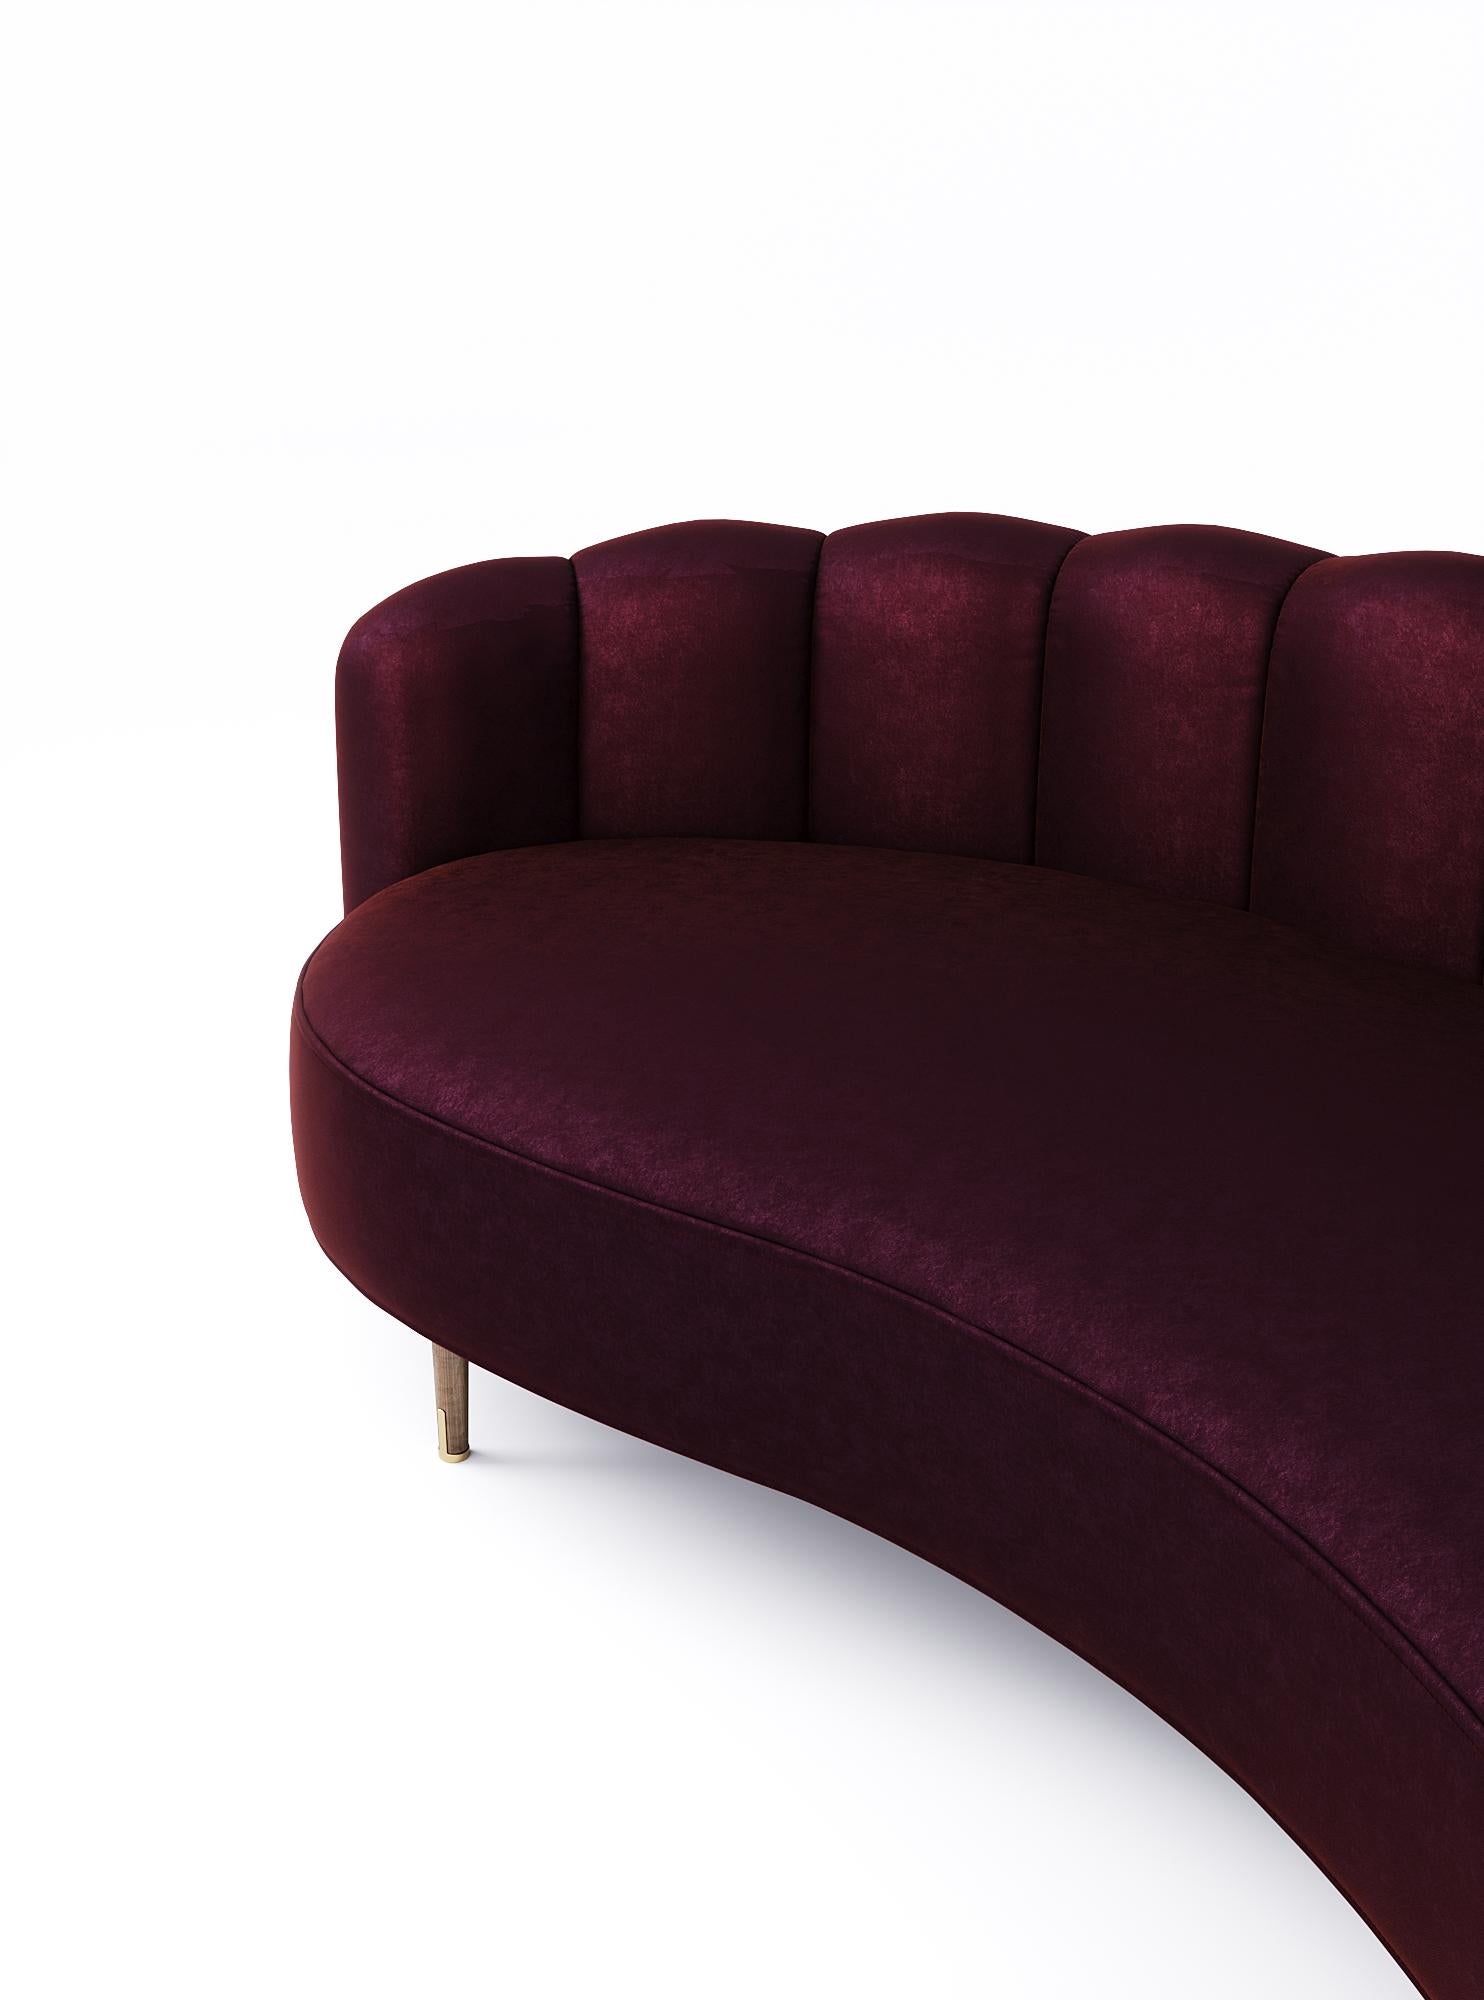 21st century Art Deco Elie Saab maison bordeaux velvet monolith sofa, Italy

With the impressive beauty of its refined manufacturing, the Monolith sofa adds a touch of Art Deco to every living environment. The backrest is composed of individual